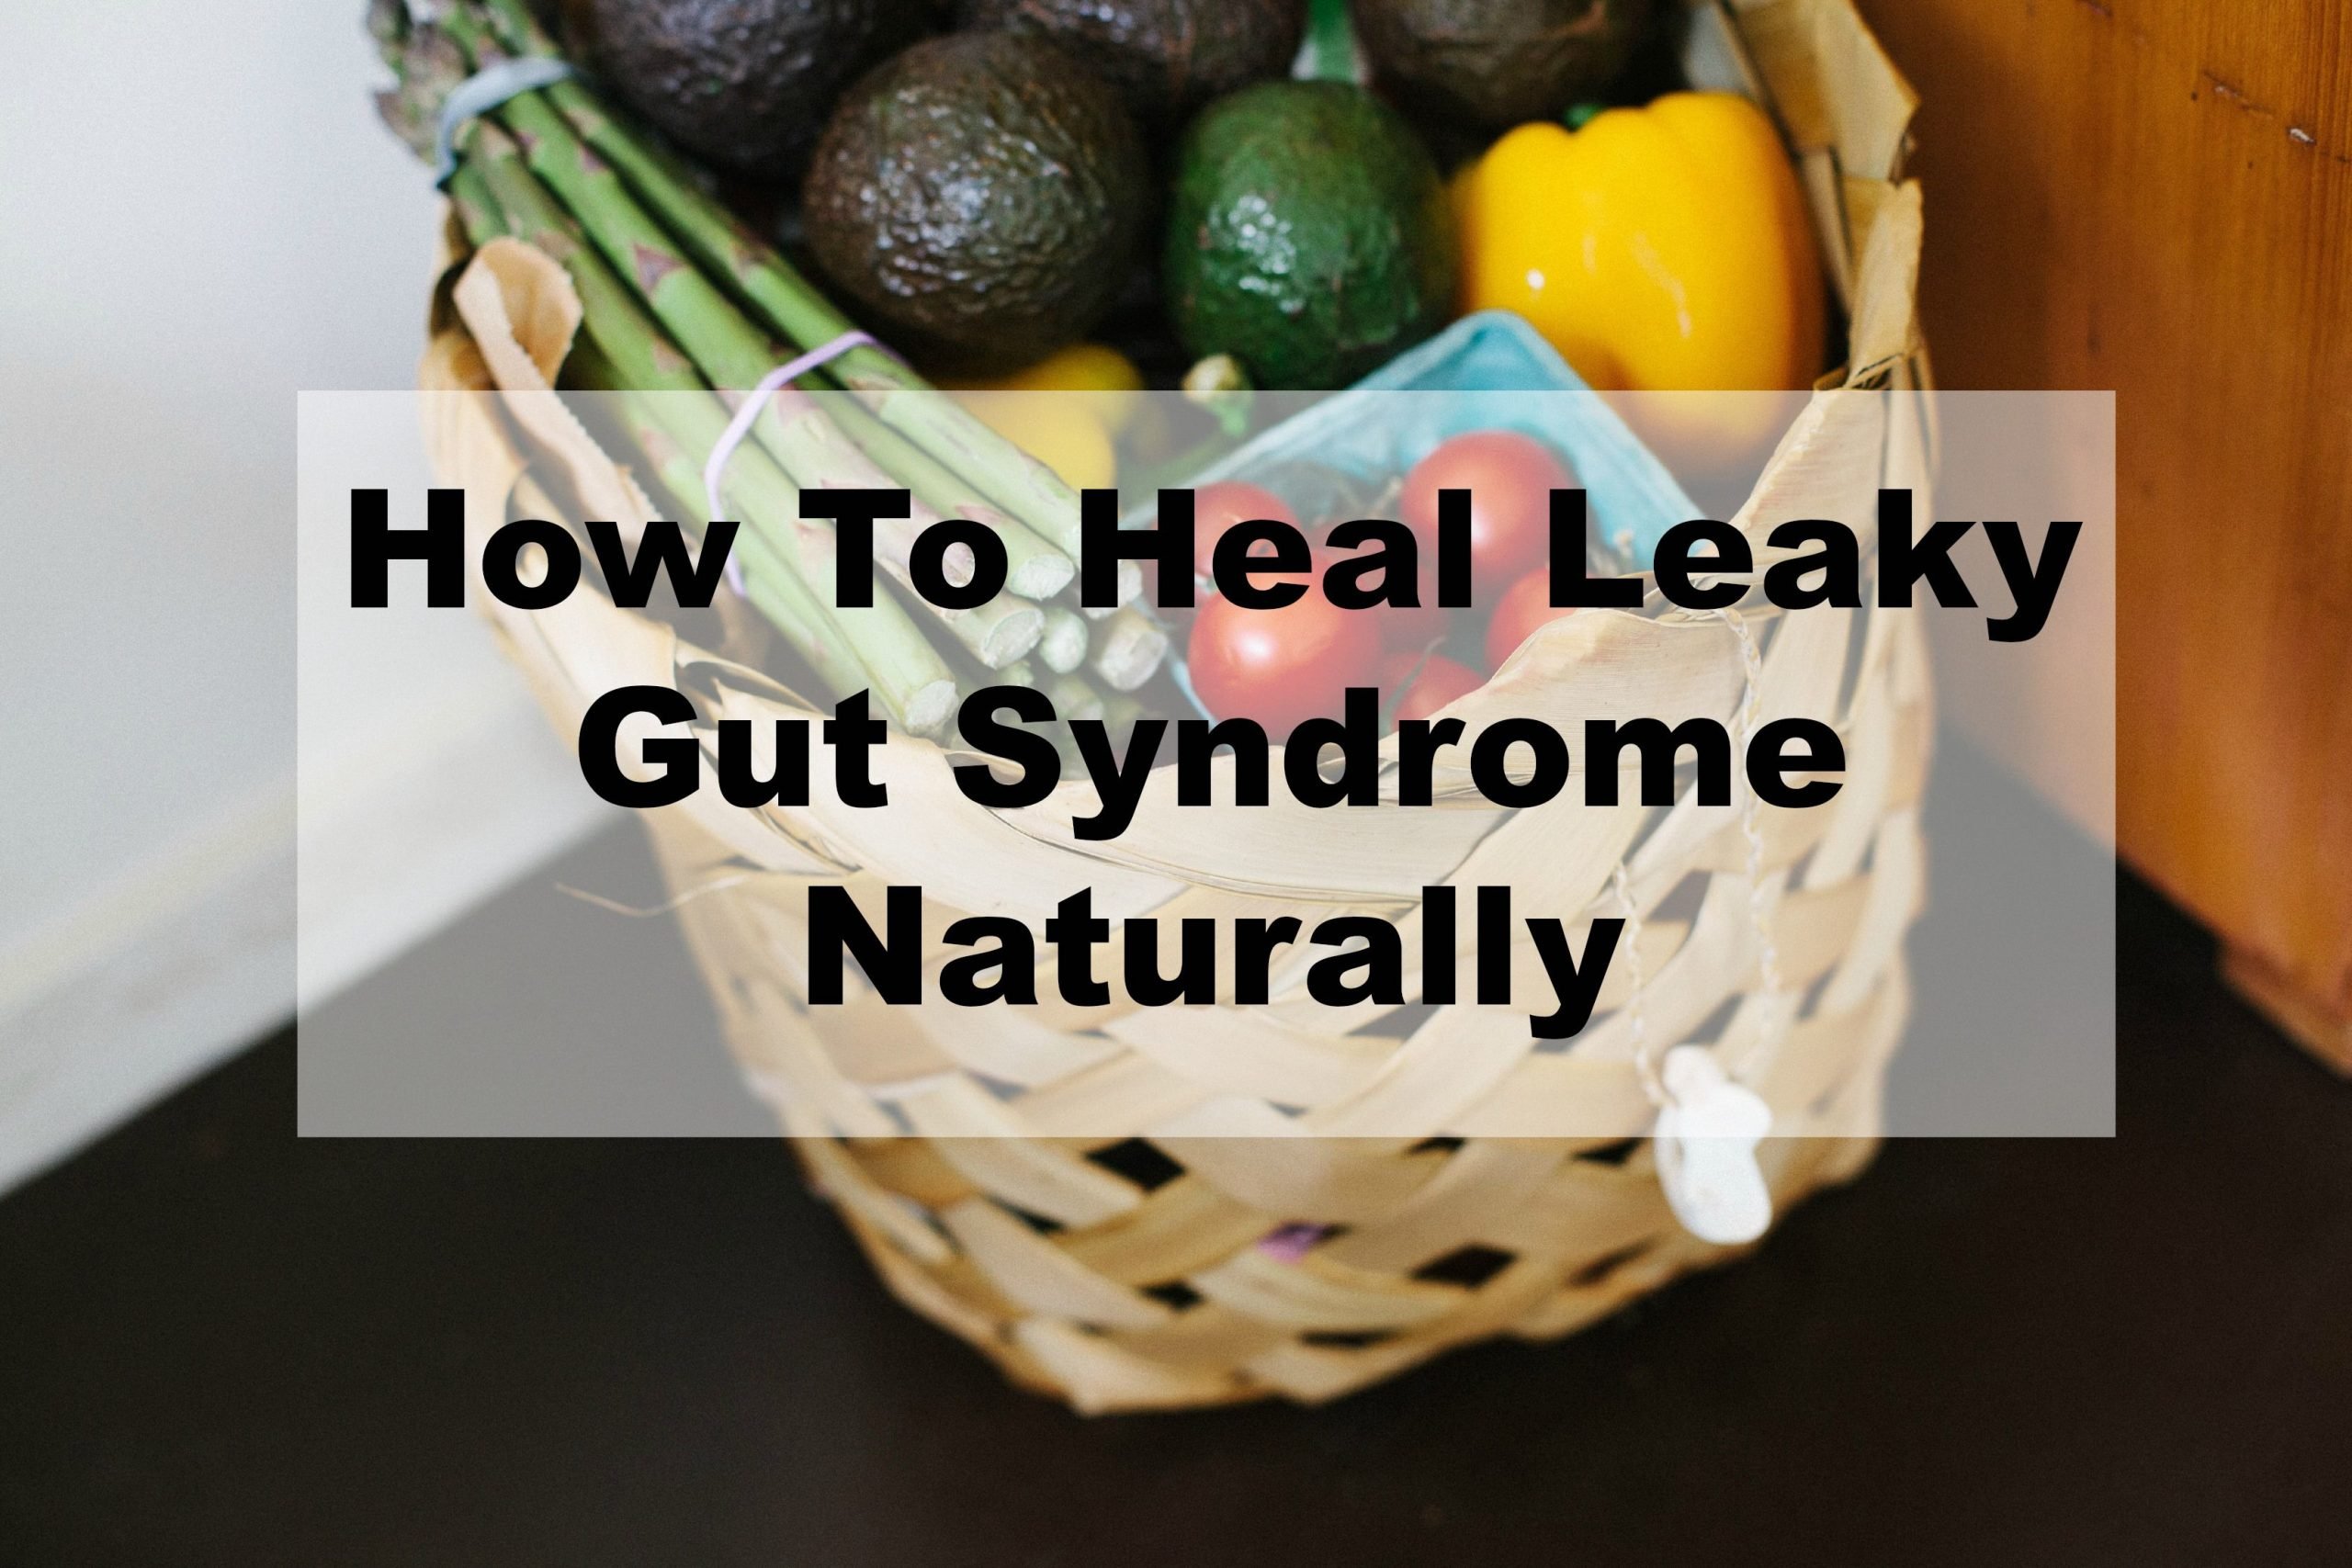 How To Heal Leaky Gut Syndrome Naturally